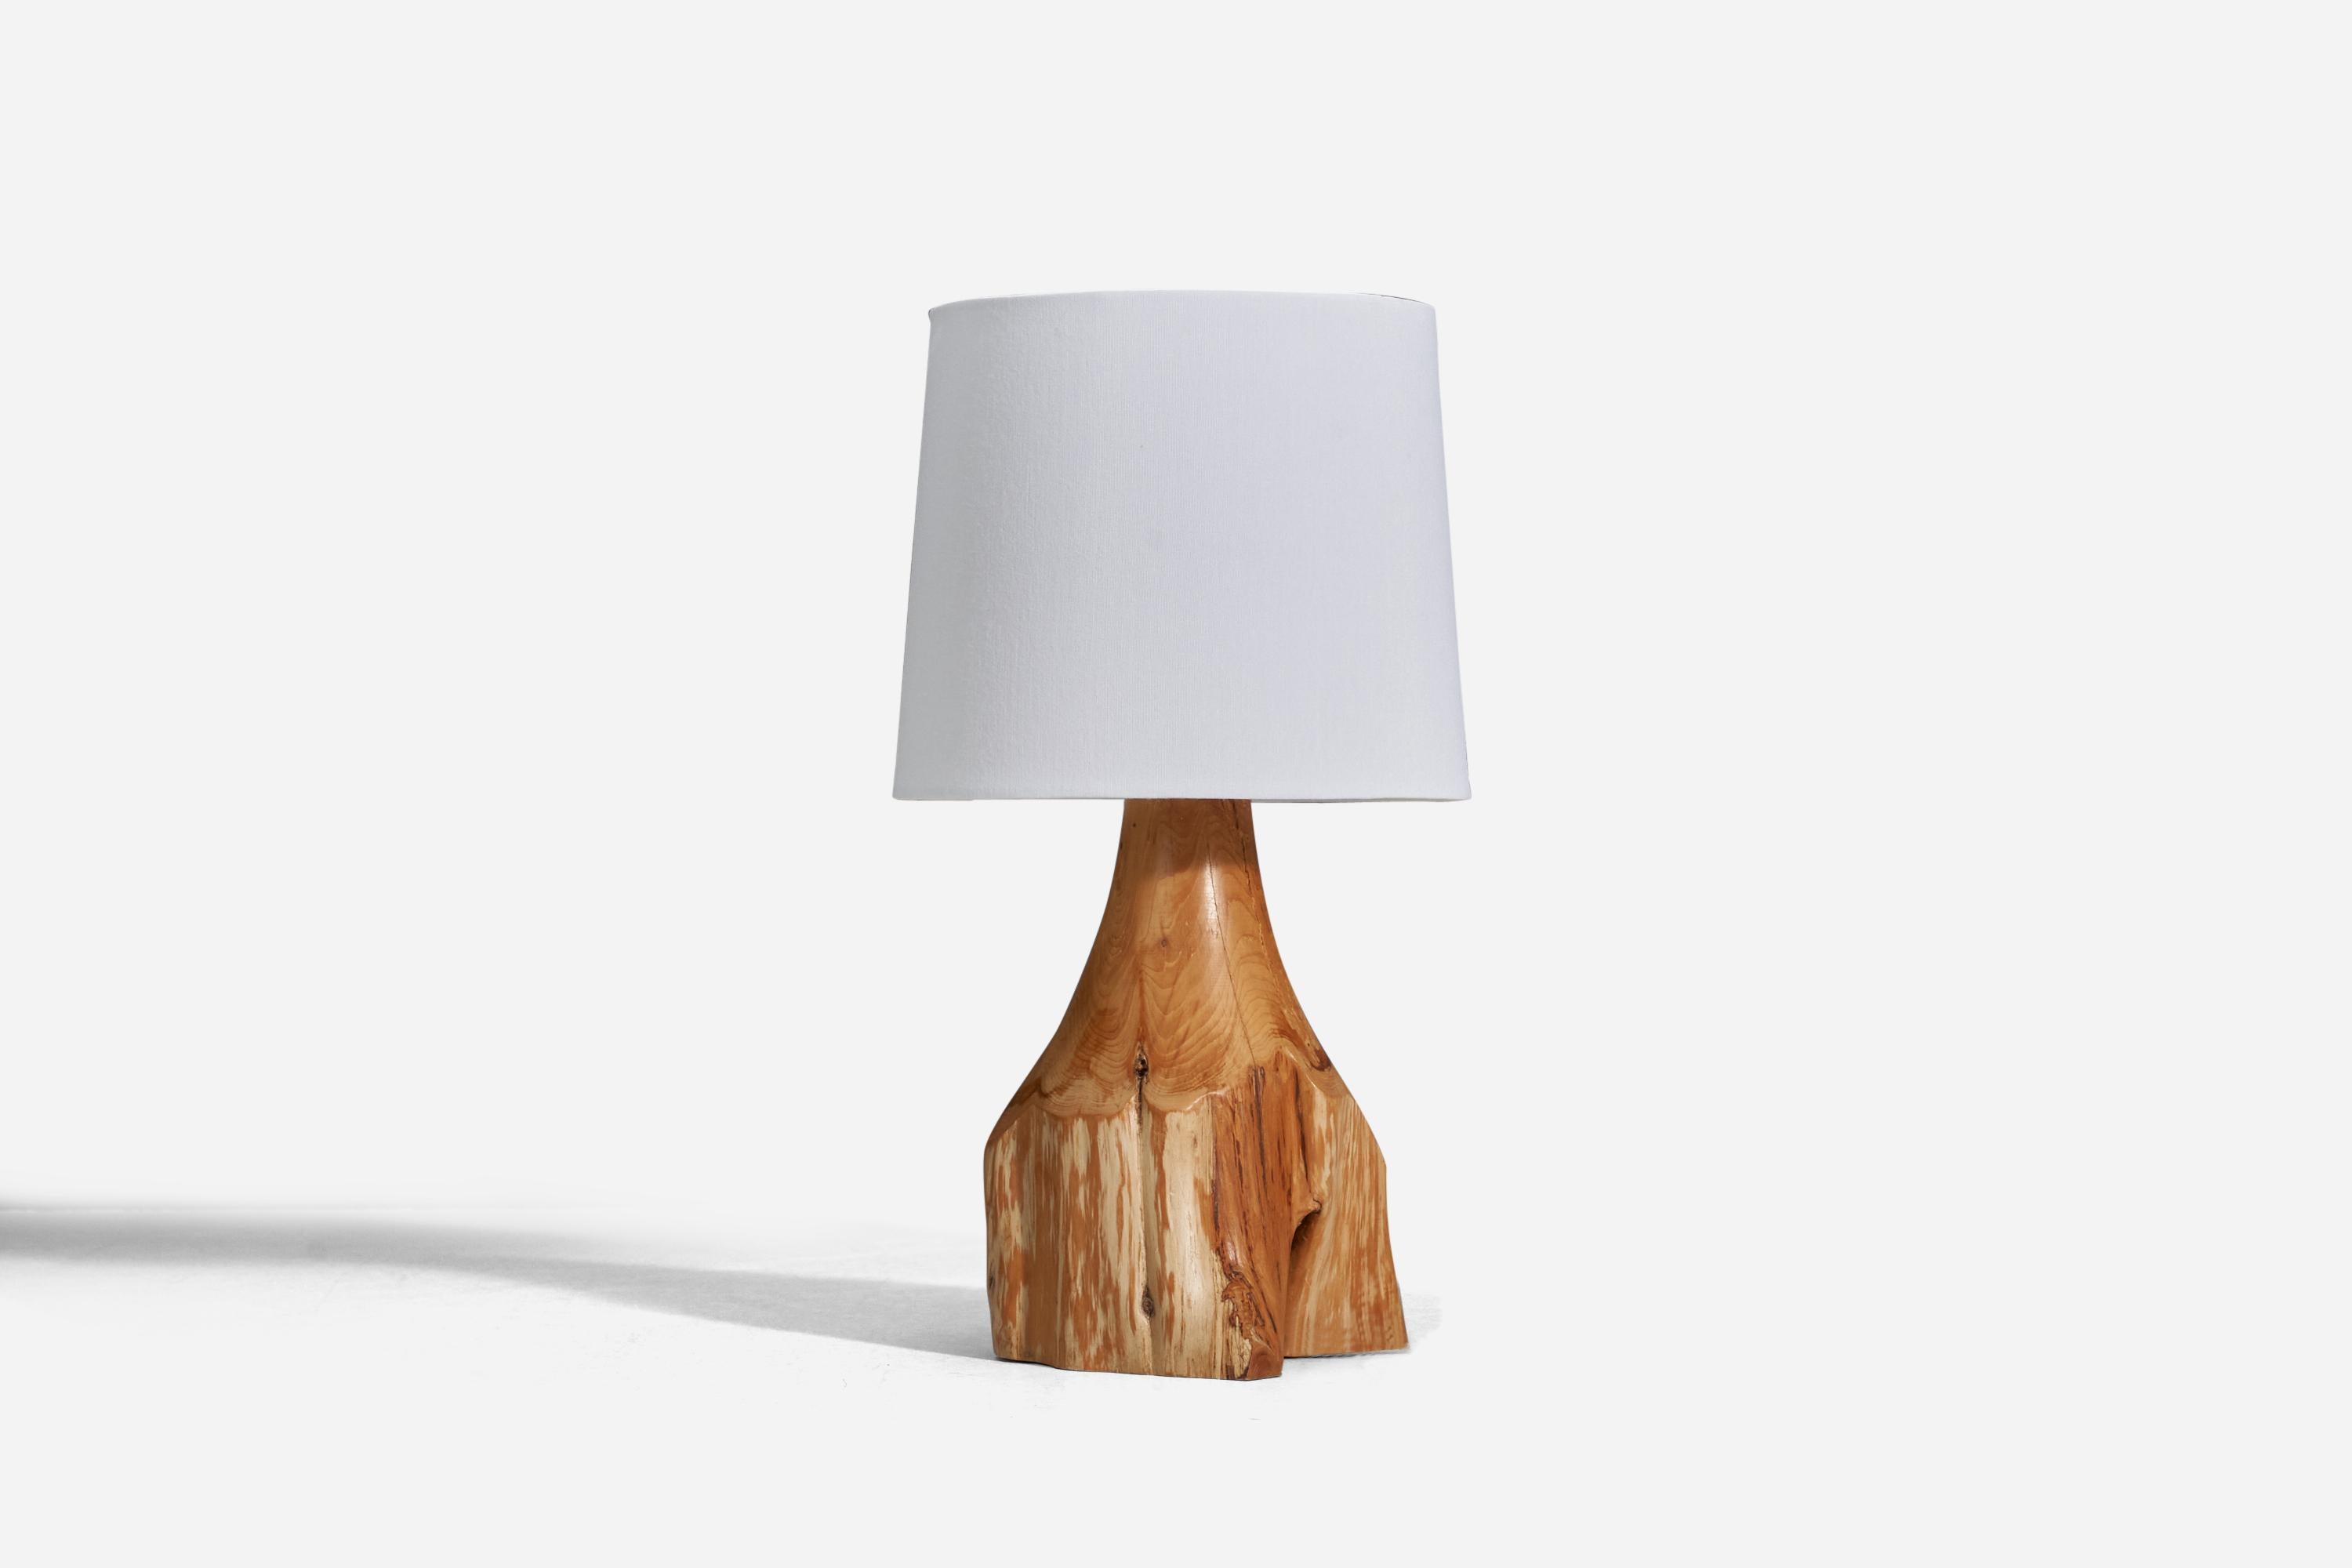 A wooden table lamp designed and produced in Sweden, 1960s. 

Sold without Lampshade
Dimensions of Lamp (inches) : 9.93 x 5.5 x 4.87 (Height x Width x Depth)
Dimensions of Lampshade (inches) : 7 x 8 x 7 (Top Diameter x Bottom Diameter x